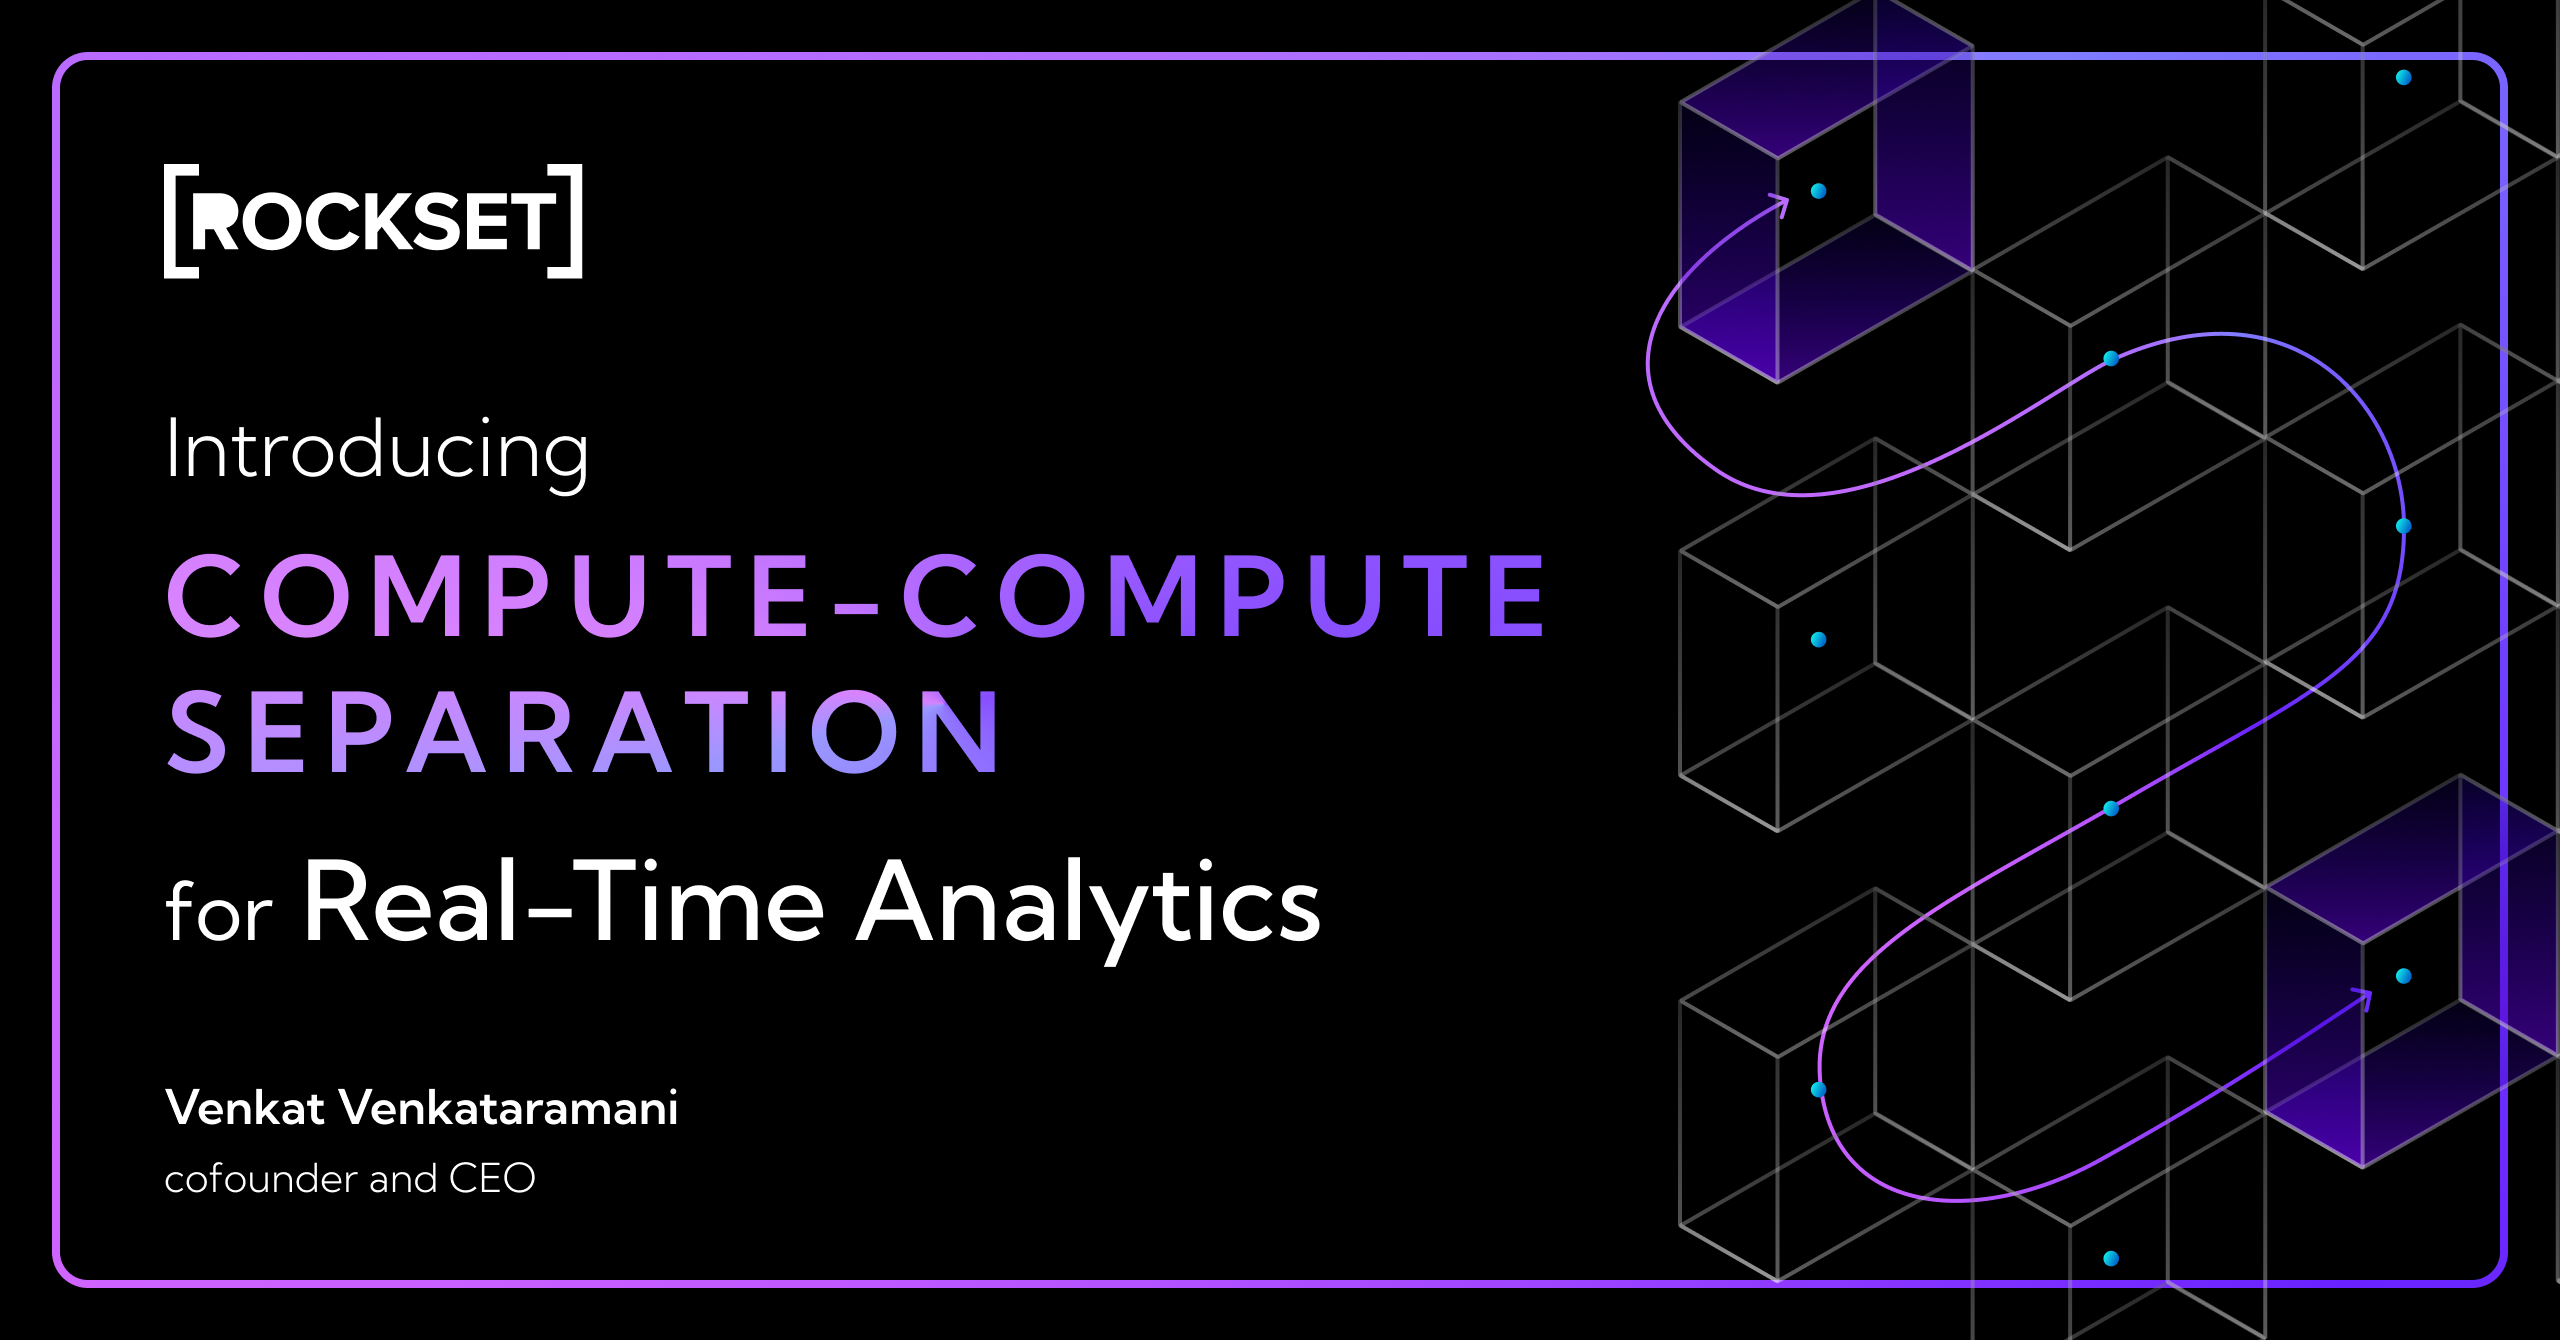 Introducing Compute-Compute Separation for Real-Time Analytics